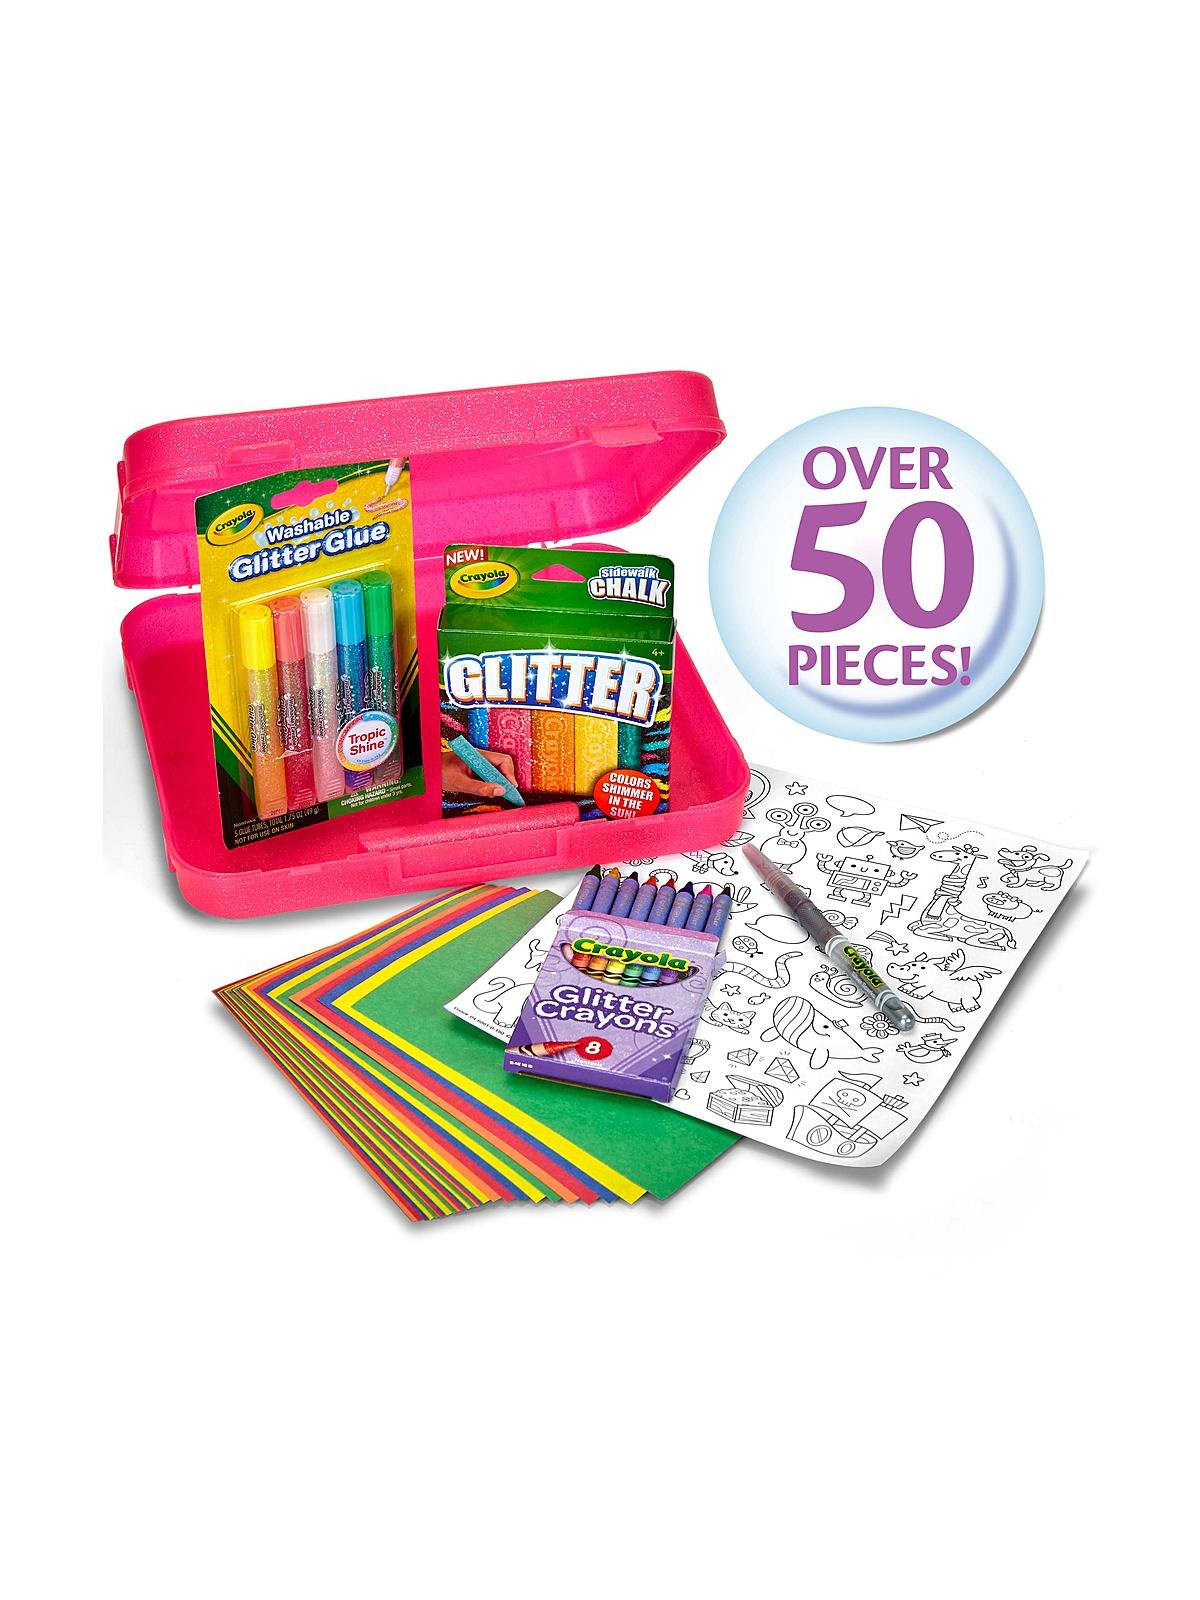 Crayola All That Glitters Art Case Coloring Set, Toys, Gift for Kids Age  5+, Pink